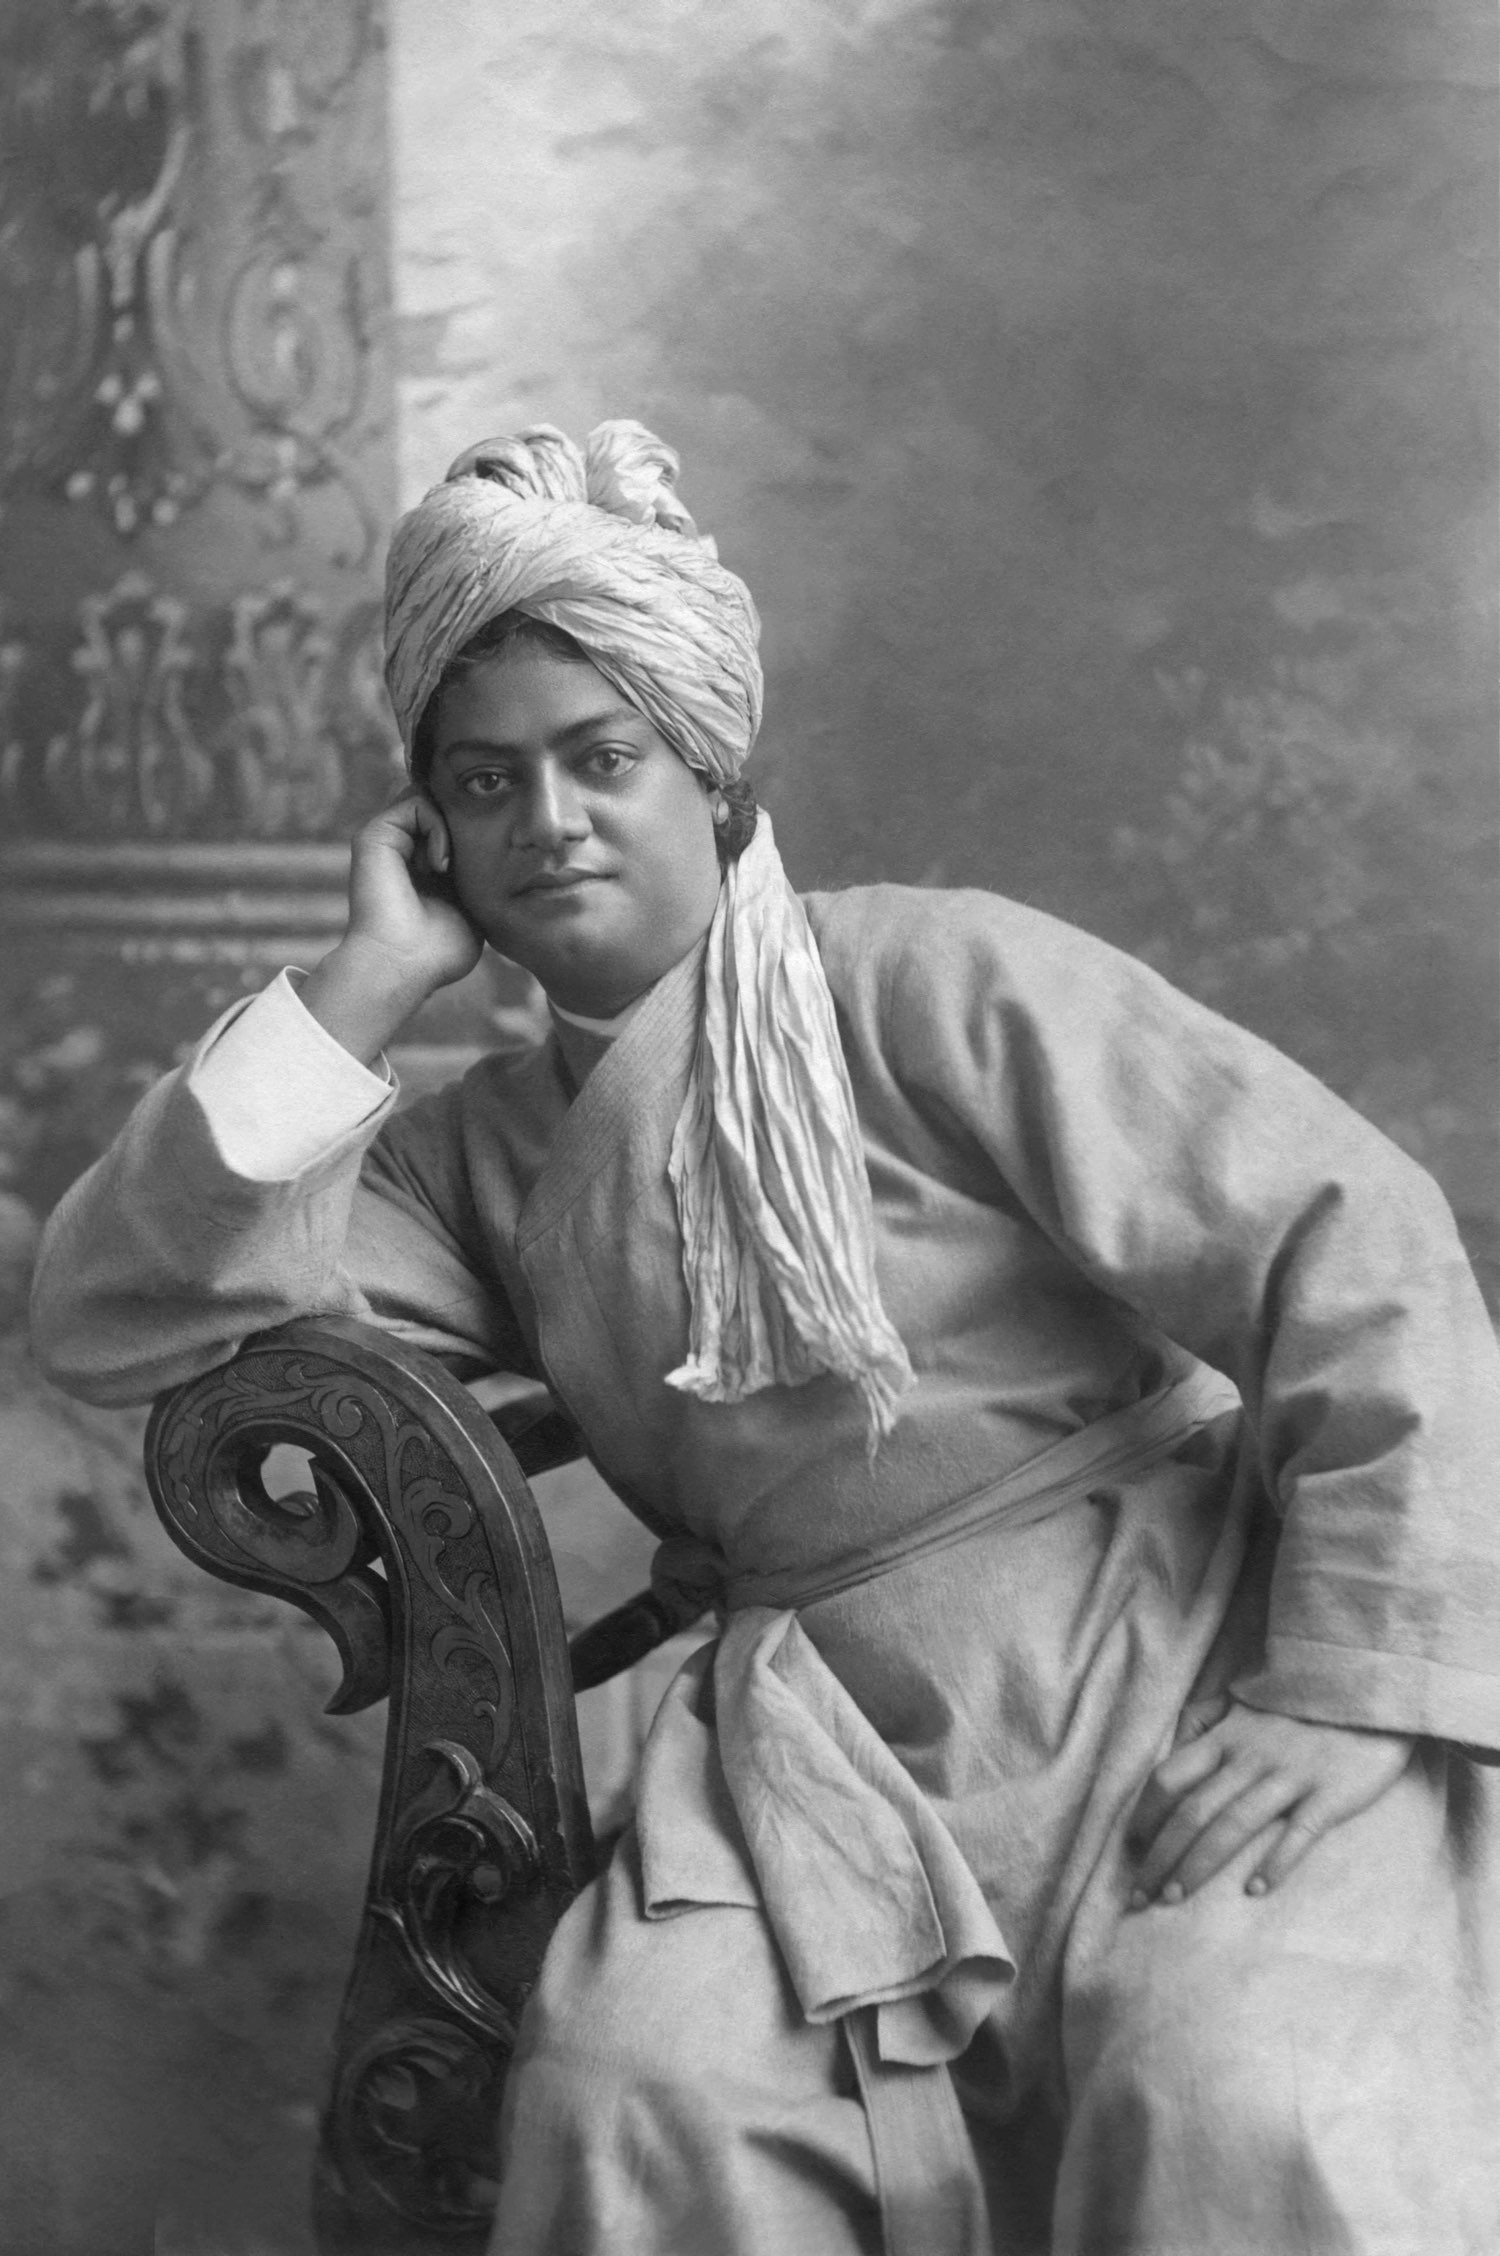 List of books written by Swami Vivekanand